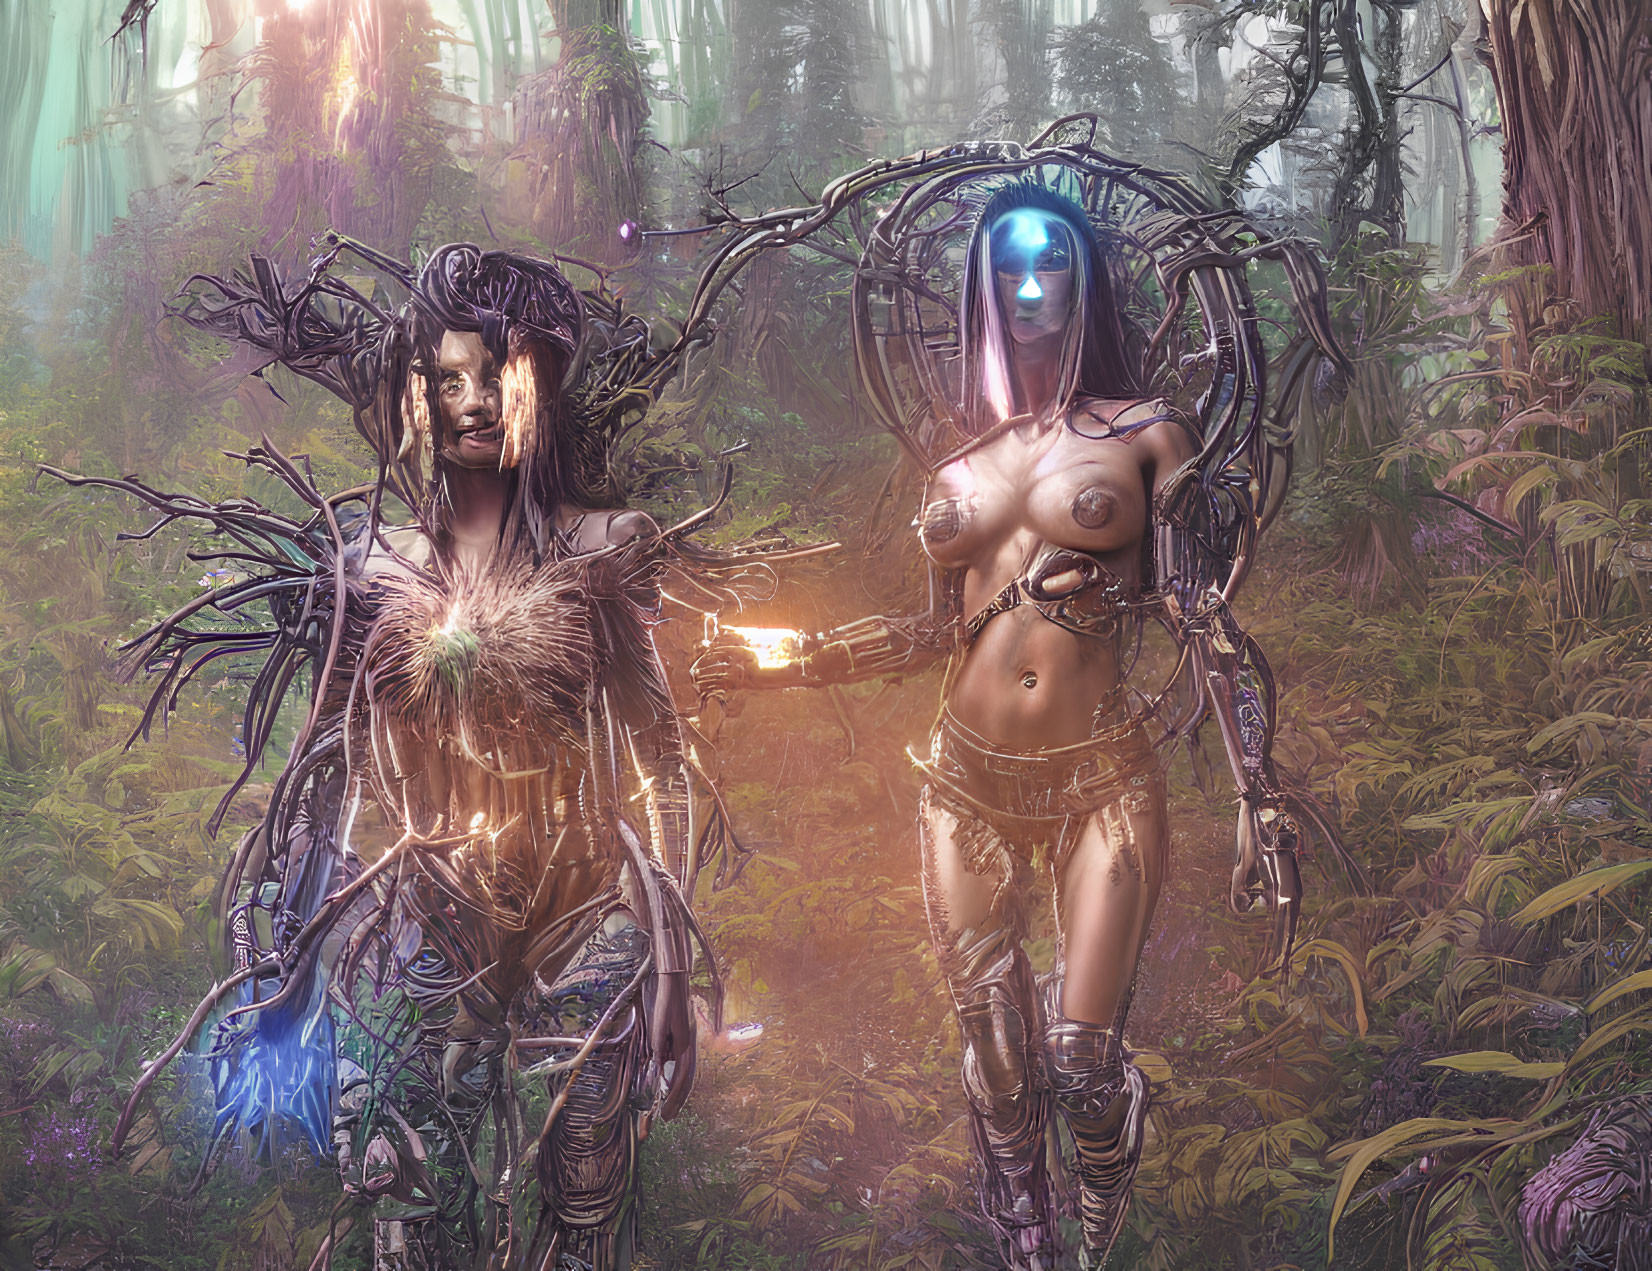 Futuristic humanoid figures with cybernetic elements in misty forest